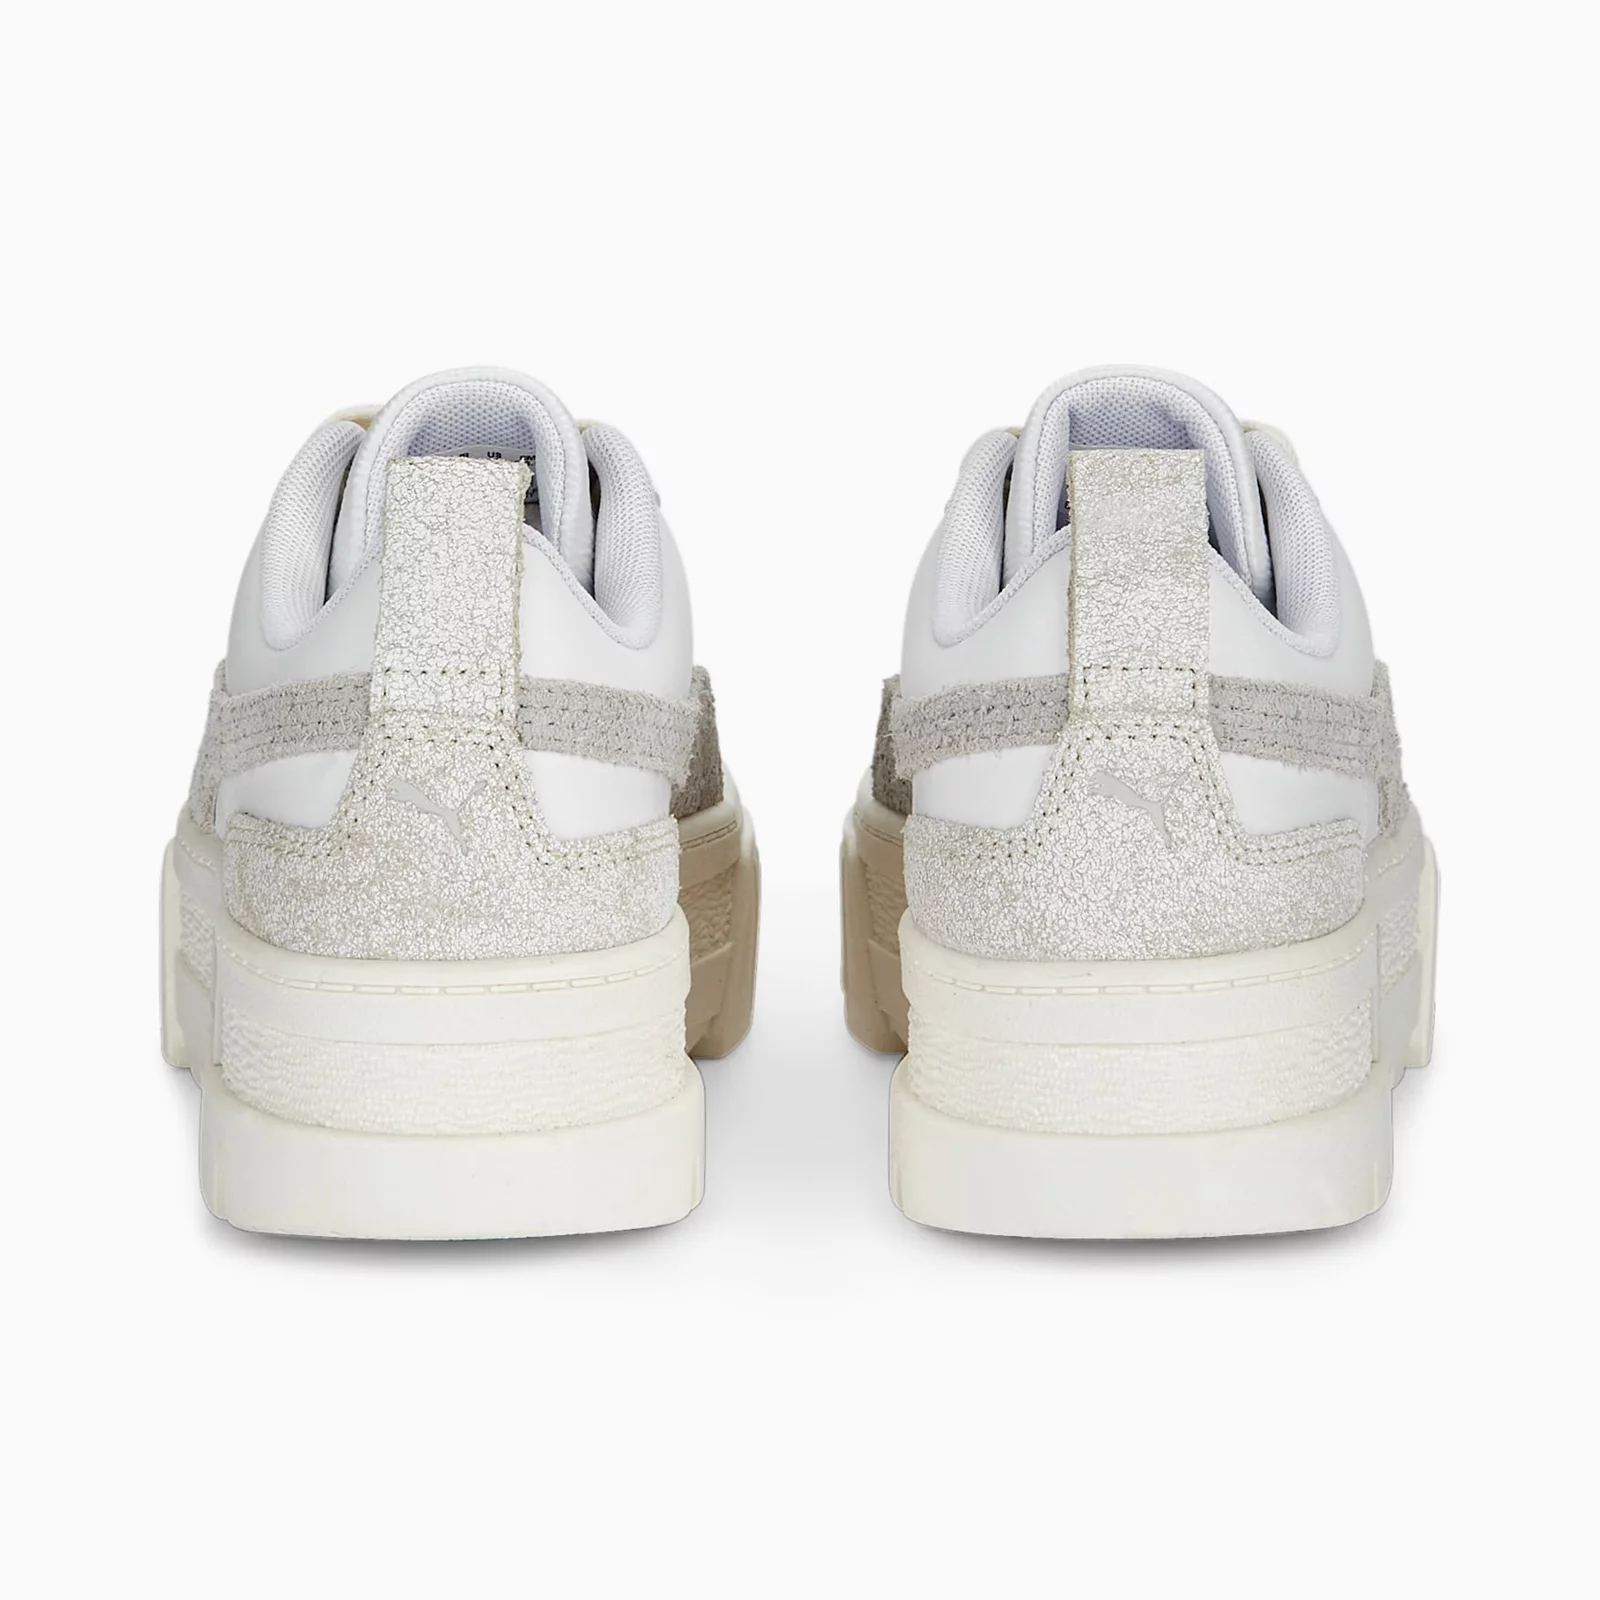 Page 2 - Puma womens | Shop for Puma sneakers & tops | ASOS